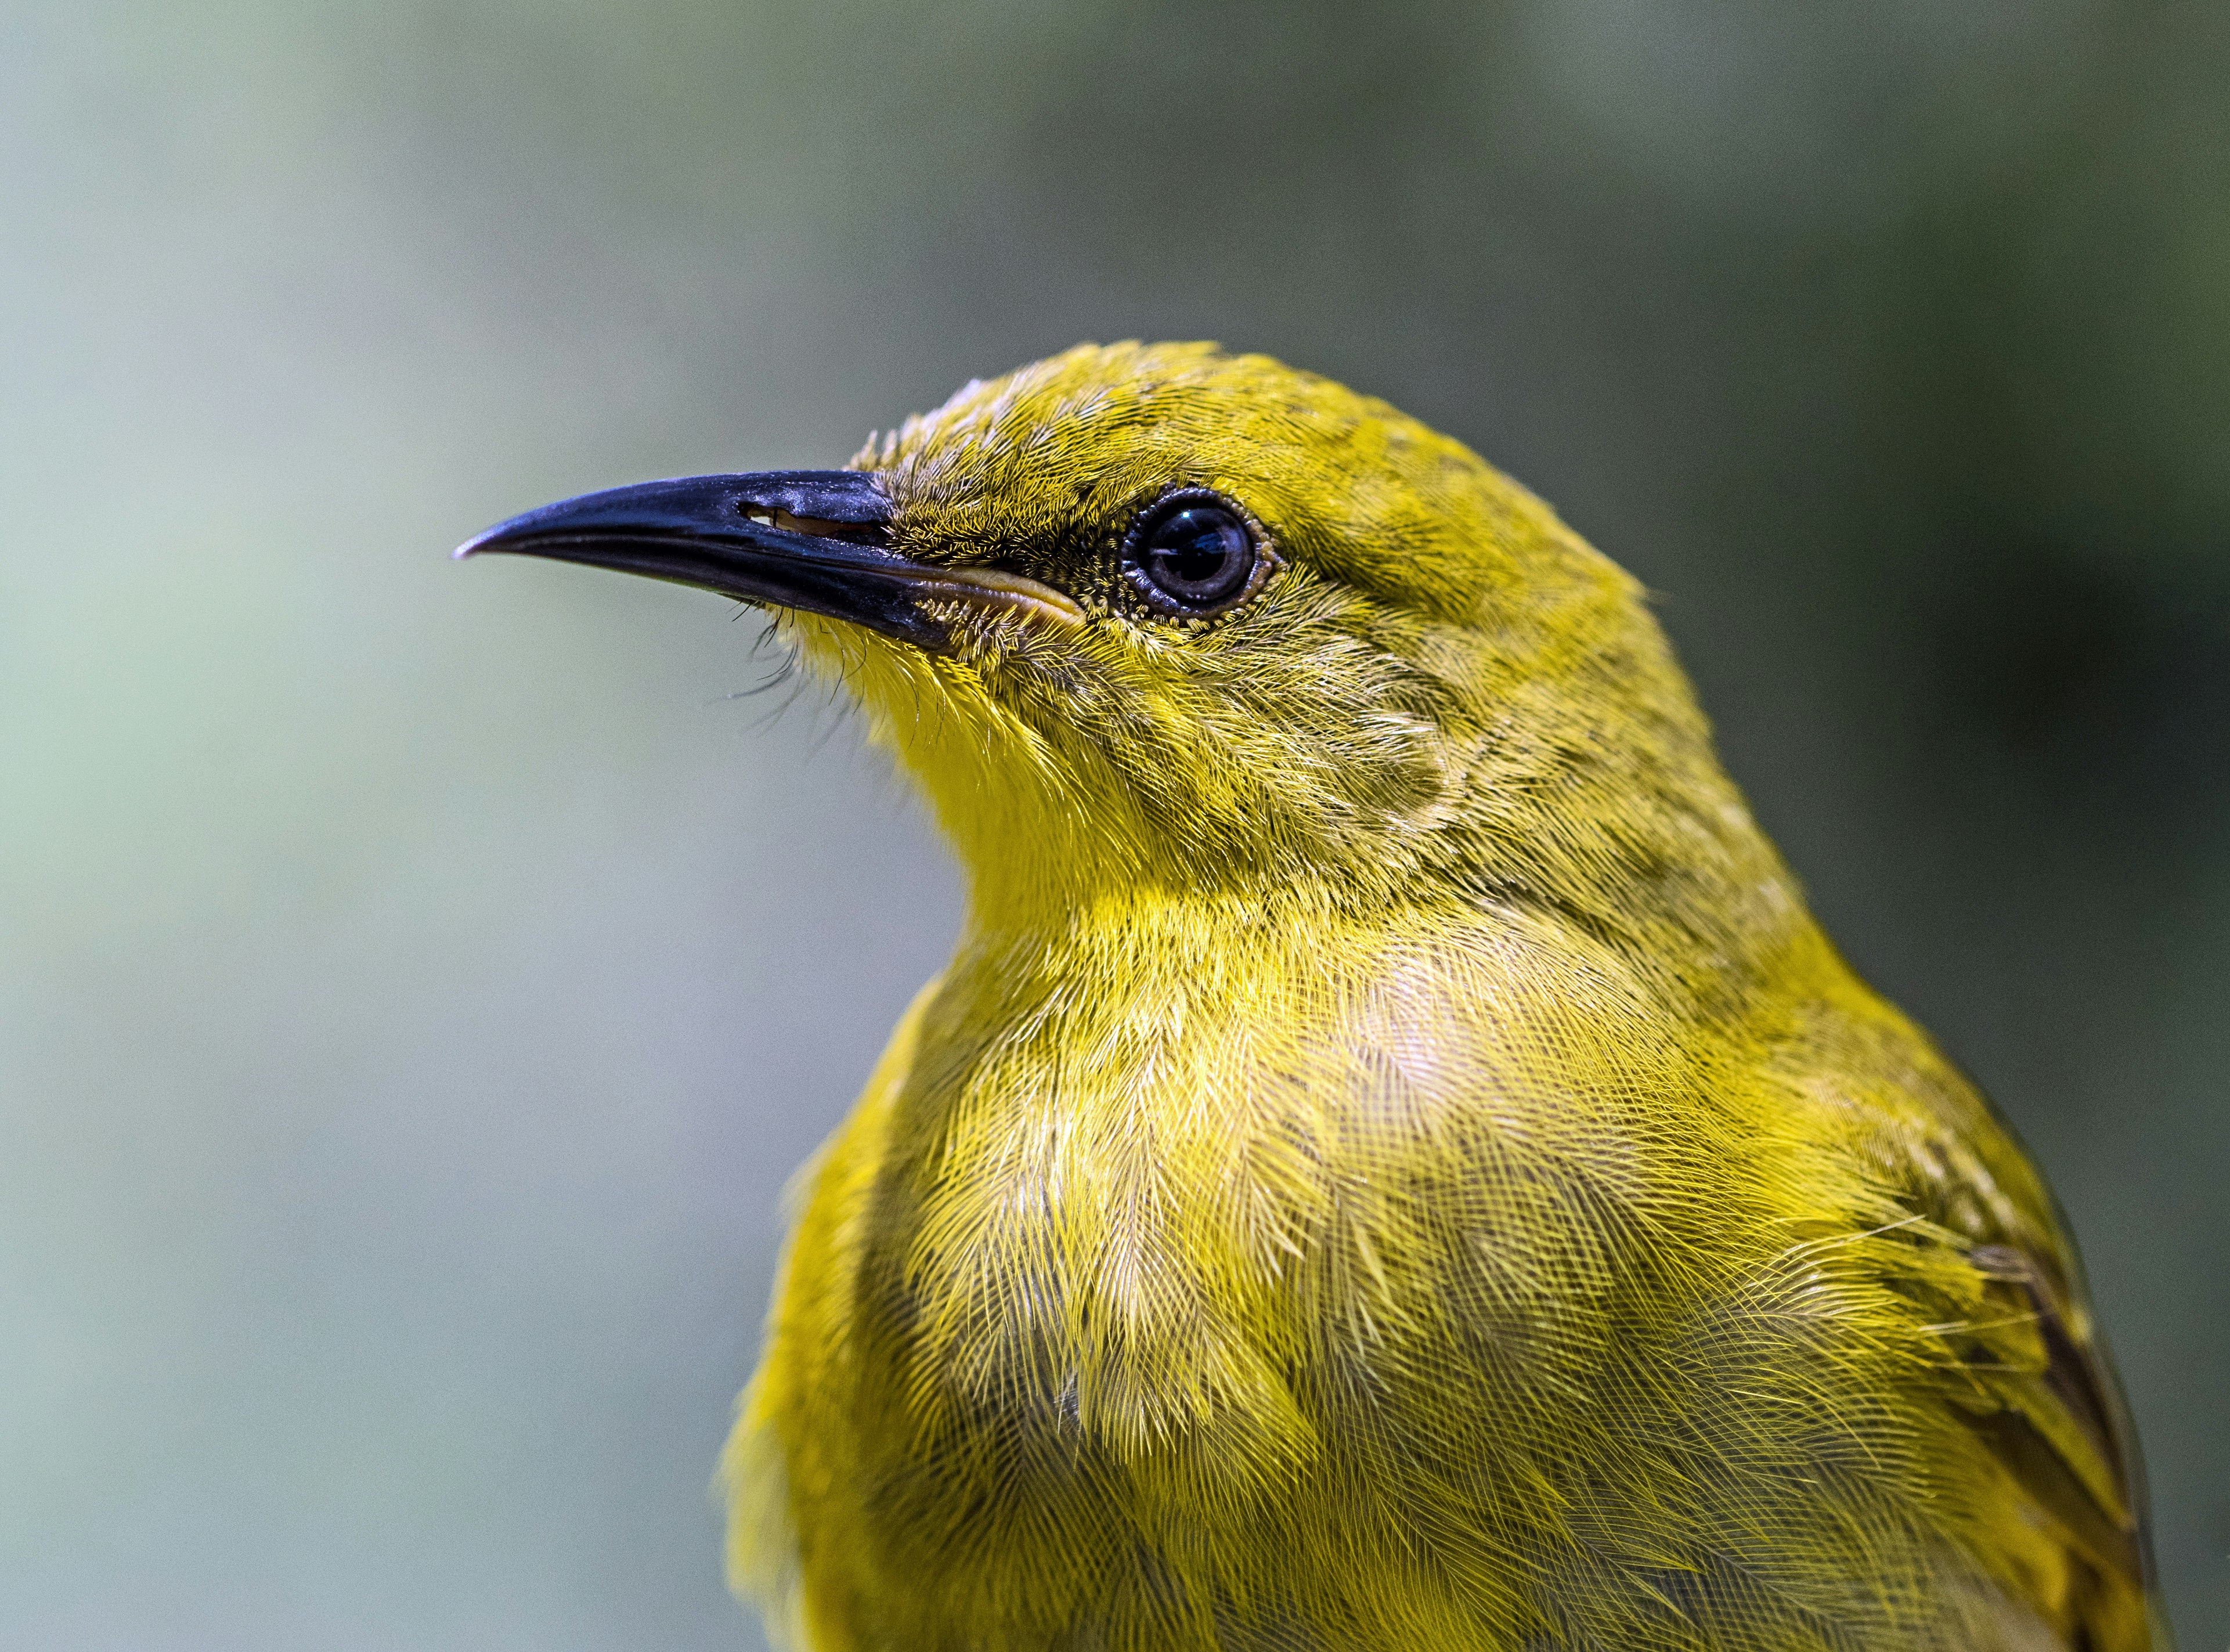 This Yellow Honeyeater at Kuranda Birdworld allowed me to get really close to photograph it. There are numerous Honeyeater bird species in Australia, which eat nectar and insects, They are active and intelligent, and important flower pollinators. They can easily be attracted to gardens if you grow the right plants.